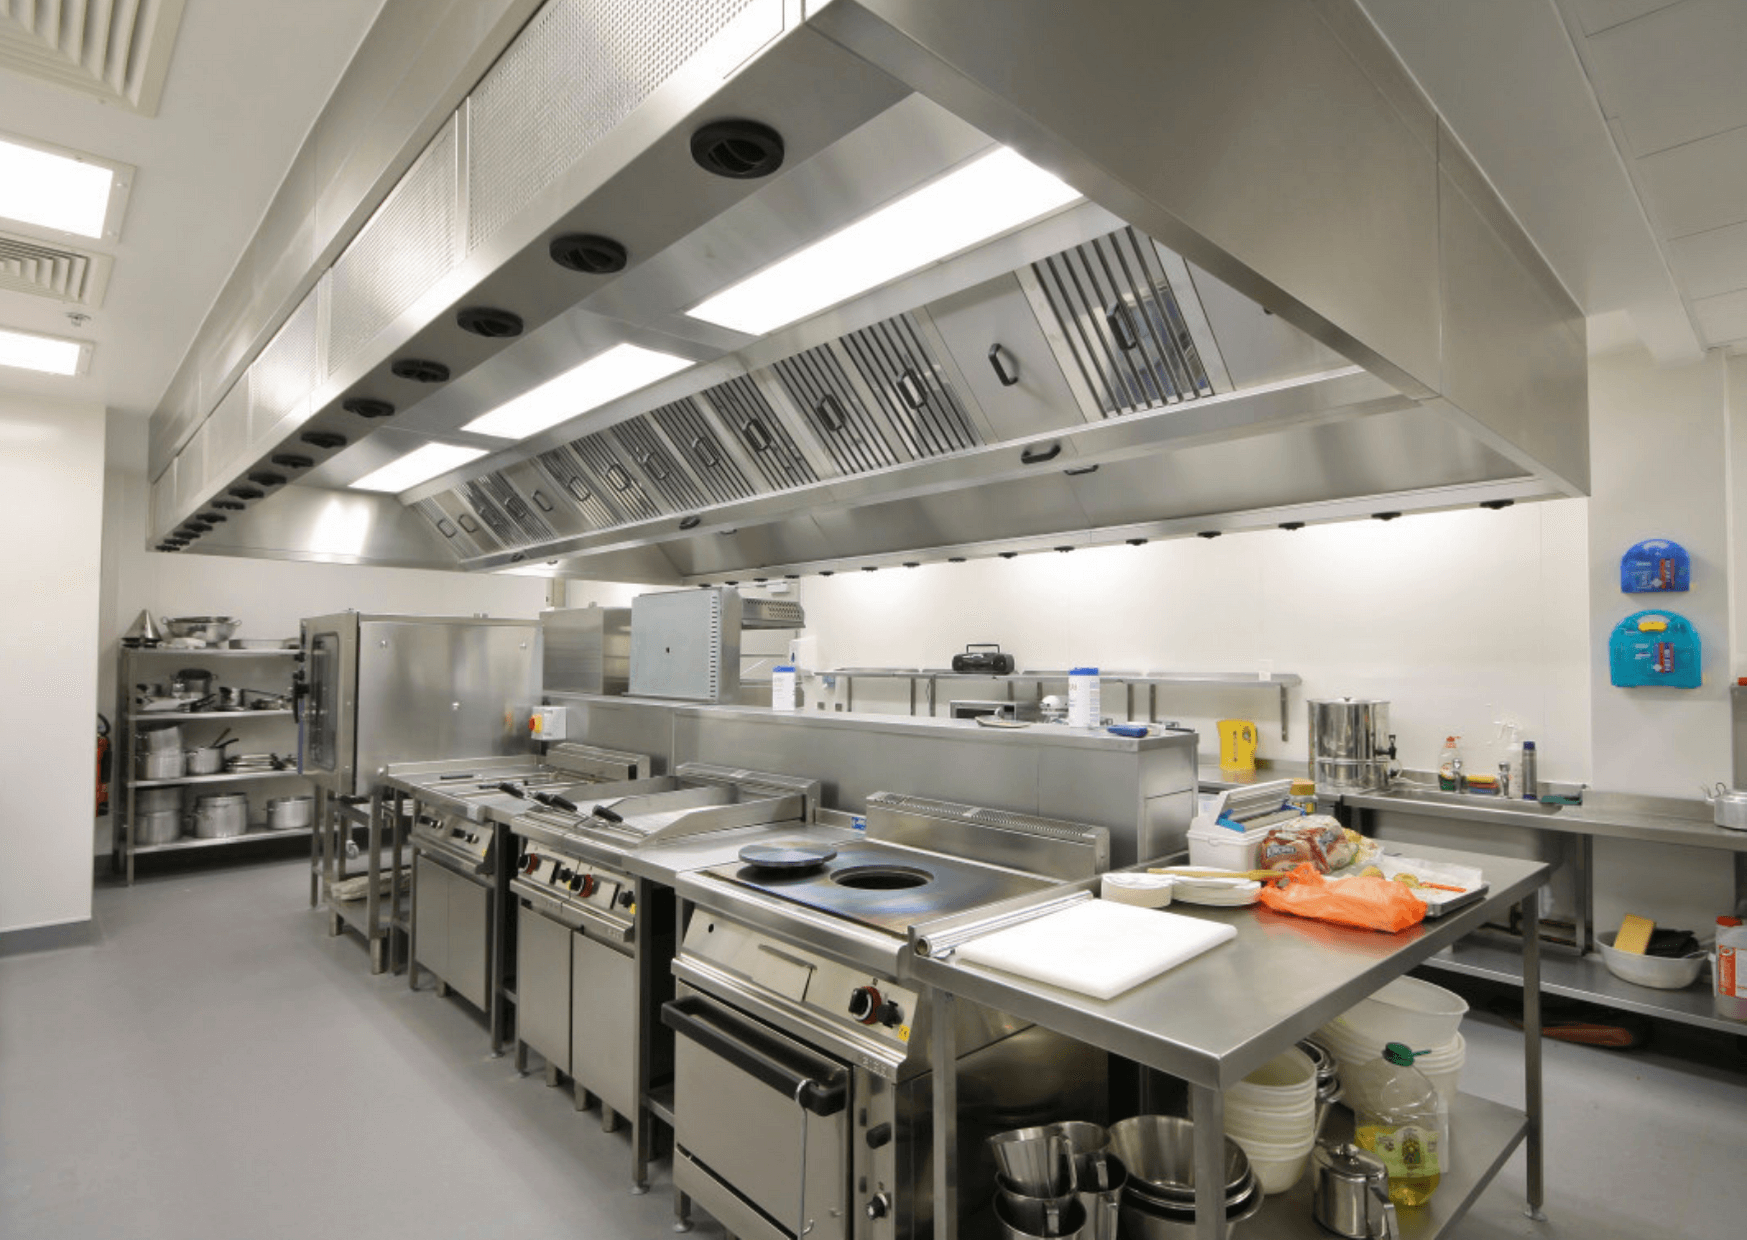 How to Design an Efficient and Functional Commercial Kitchen | Buildeo